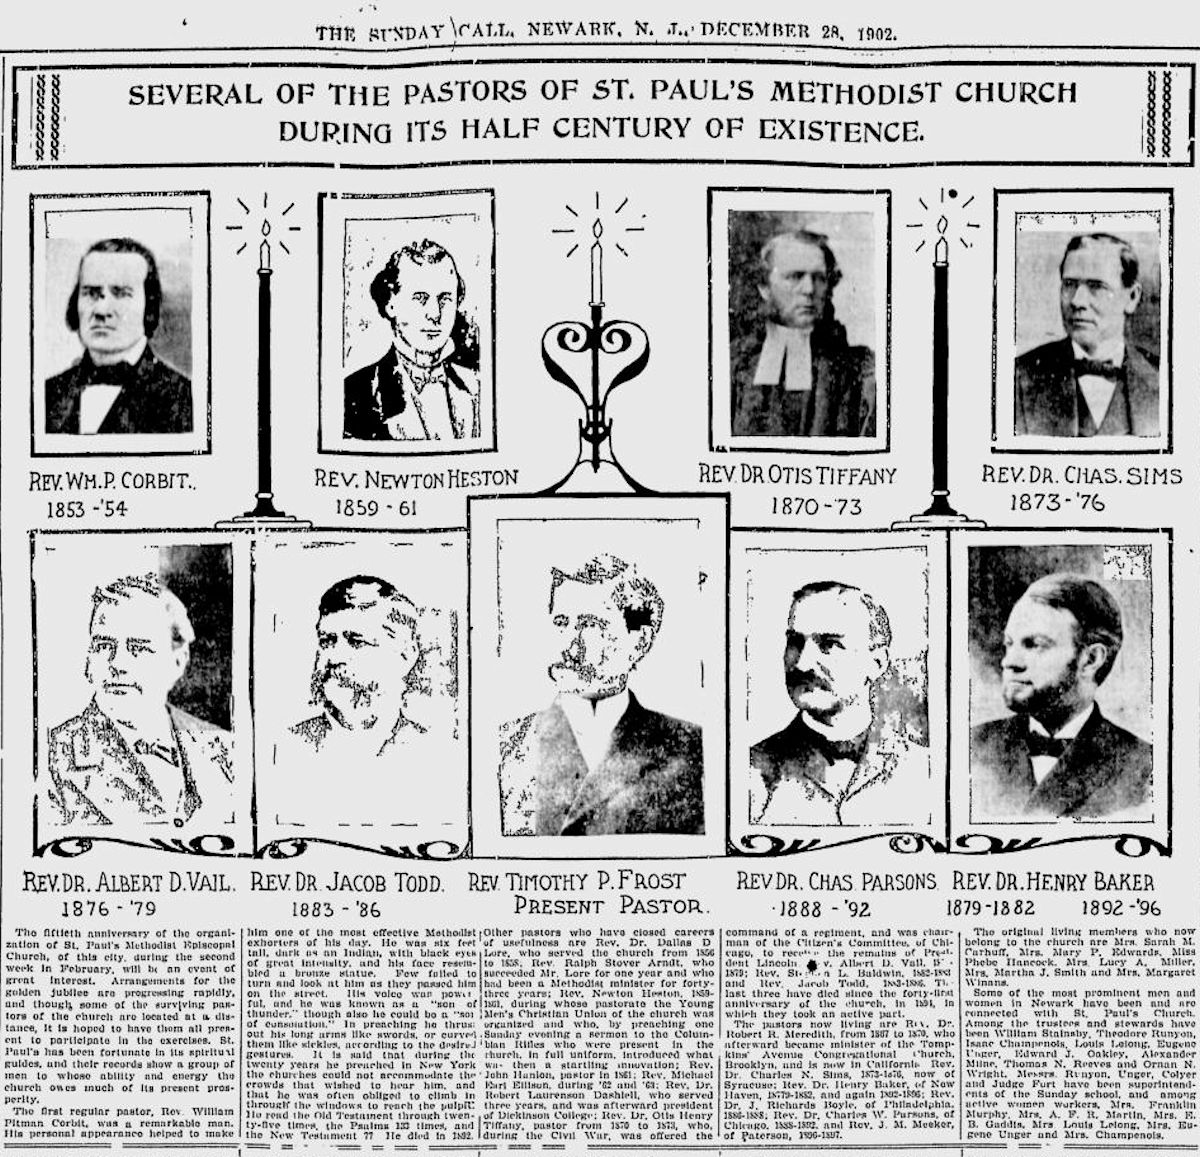 Several of the Pastors of St. Paul's Methodist Church During Its Half Century of Existence
December 28, 1902
